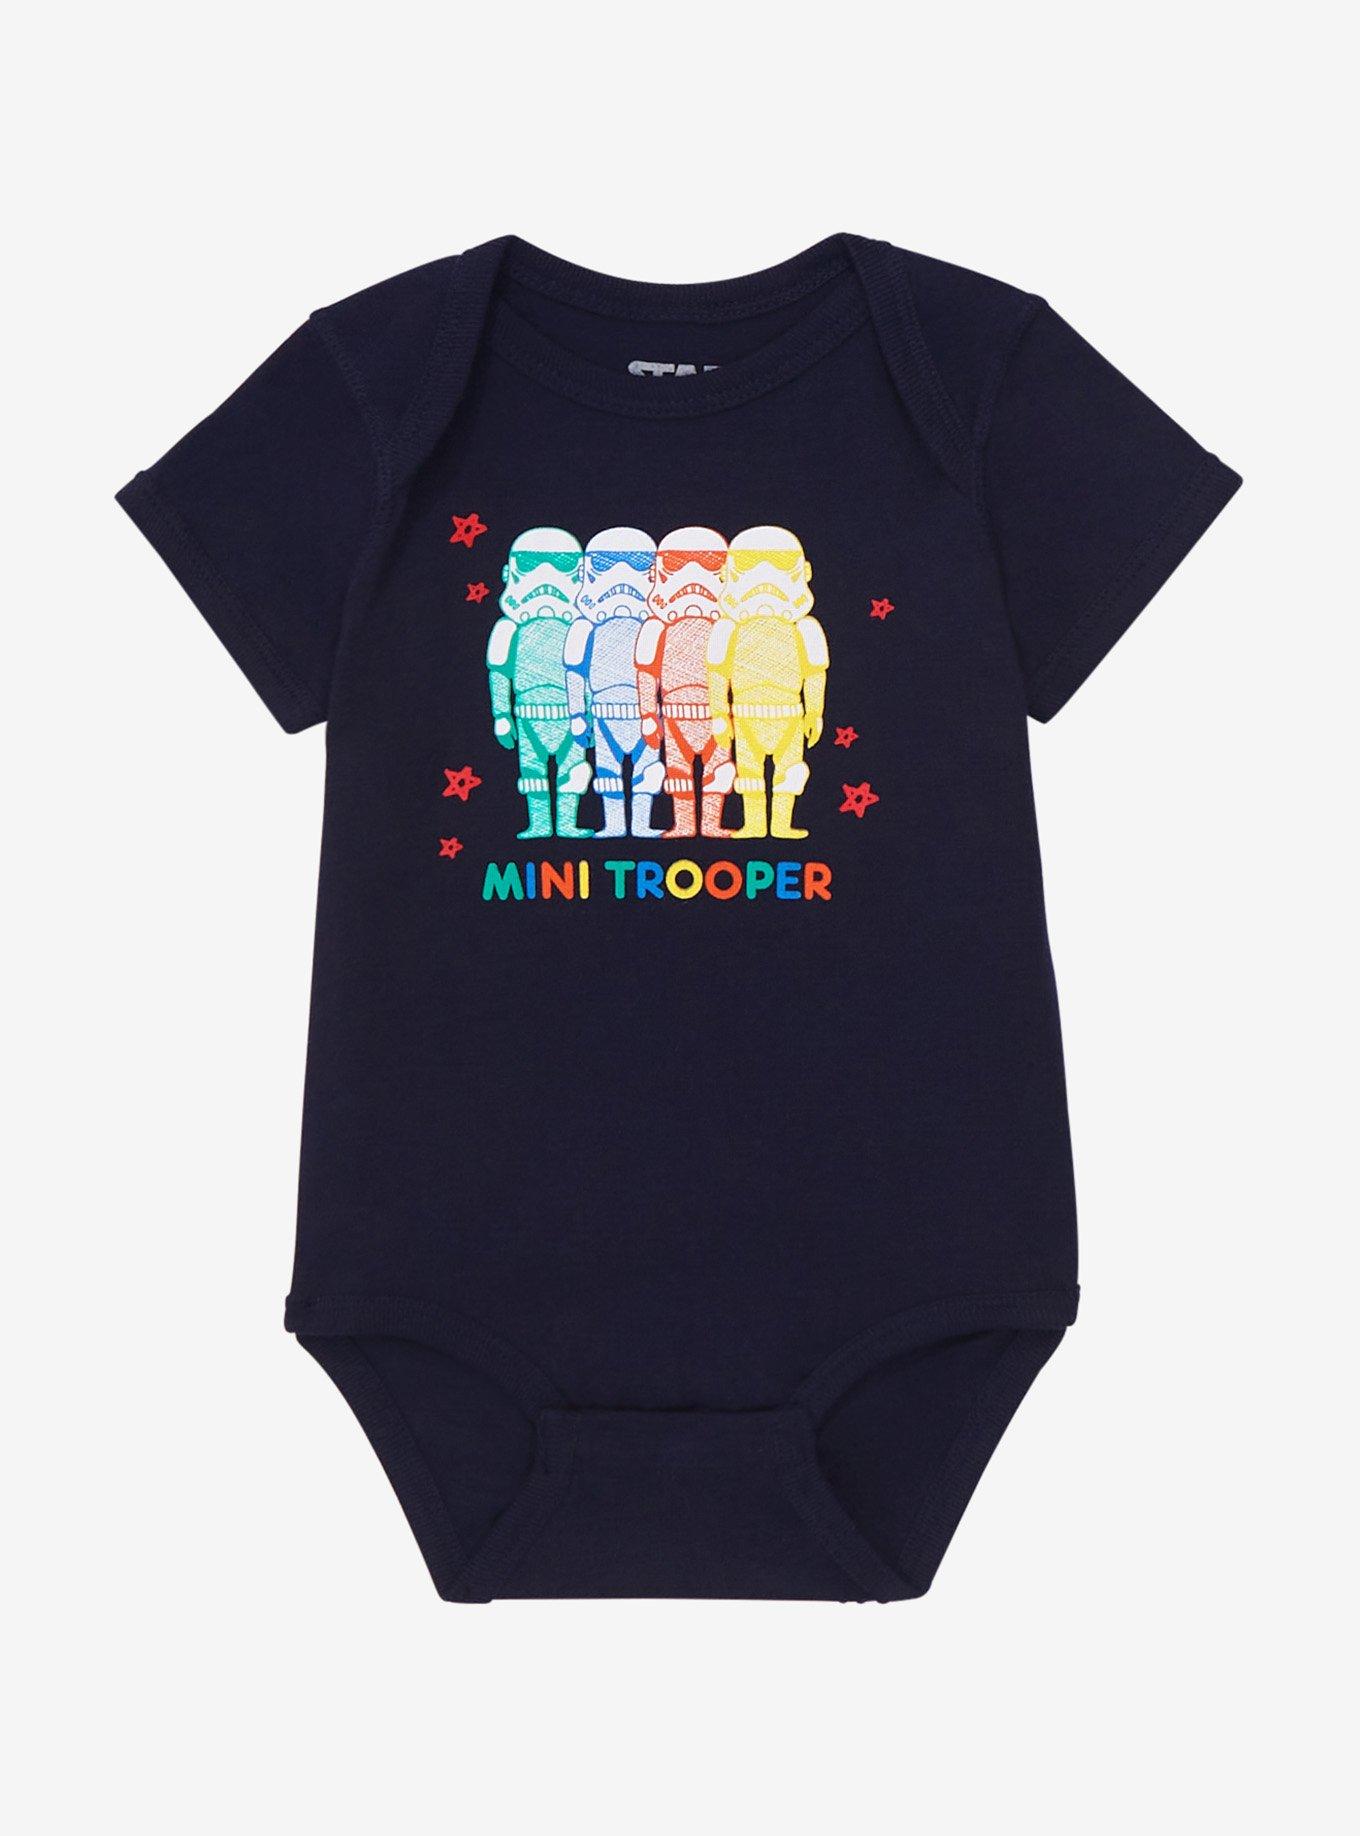 Star Wars Storm Troopers Mini Trooper Colorful Infant One-Piece - BoxLunch Exclusive, NAVY, hi-res